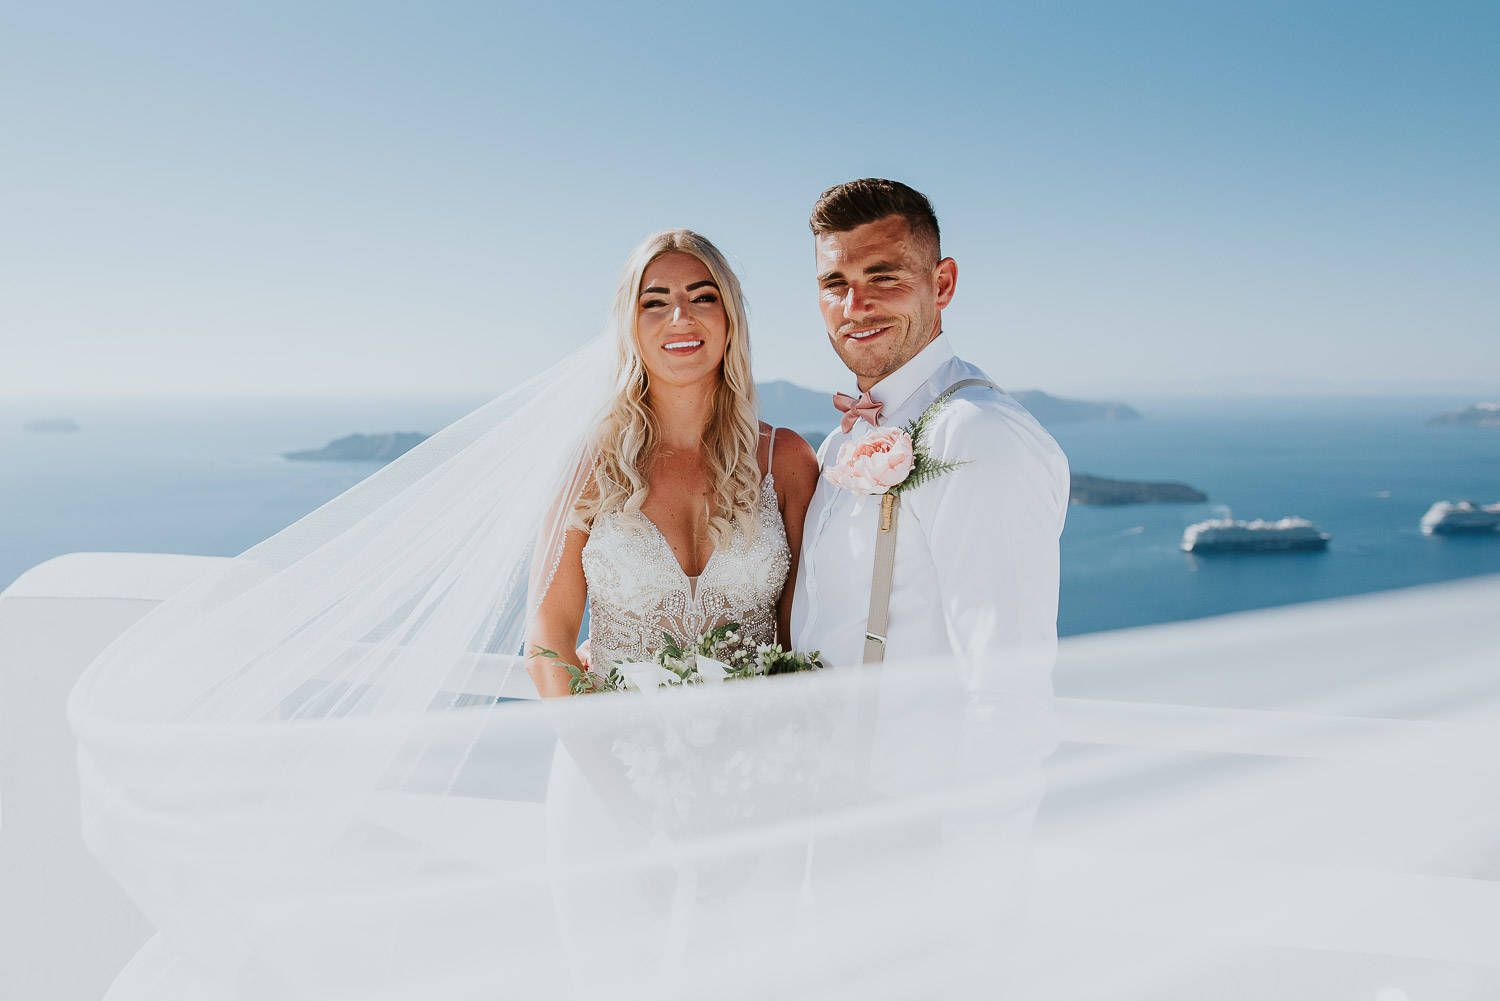 Wedding photographer Santorini: close up of bride and groom engulfed in the veil looking at the camera with the sea in the background by Ben and Vesna.